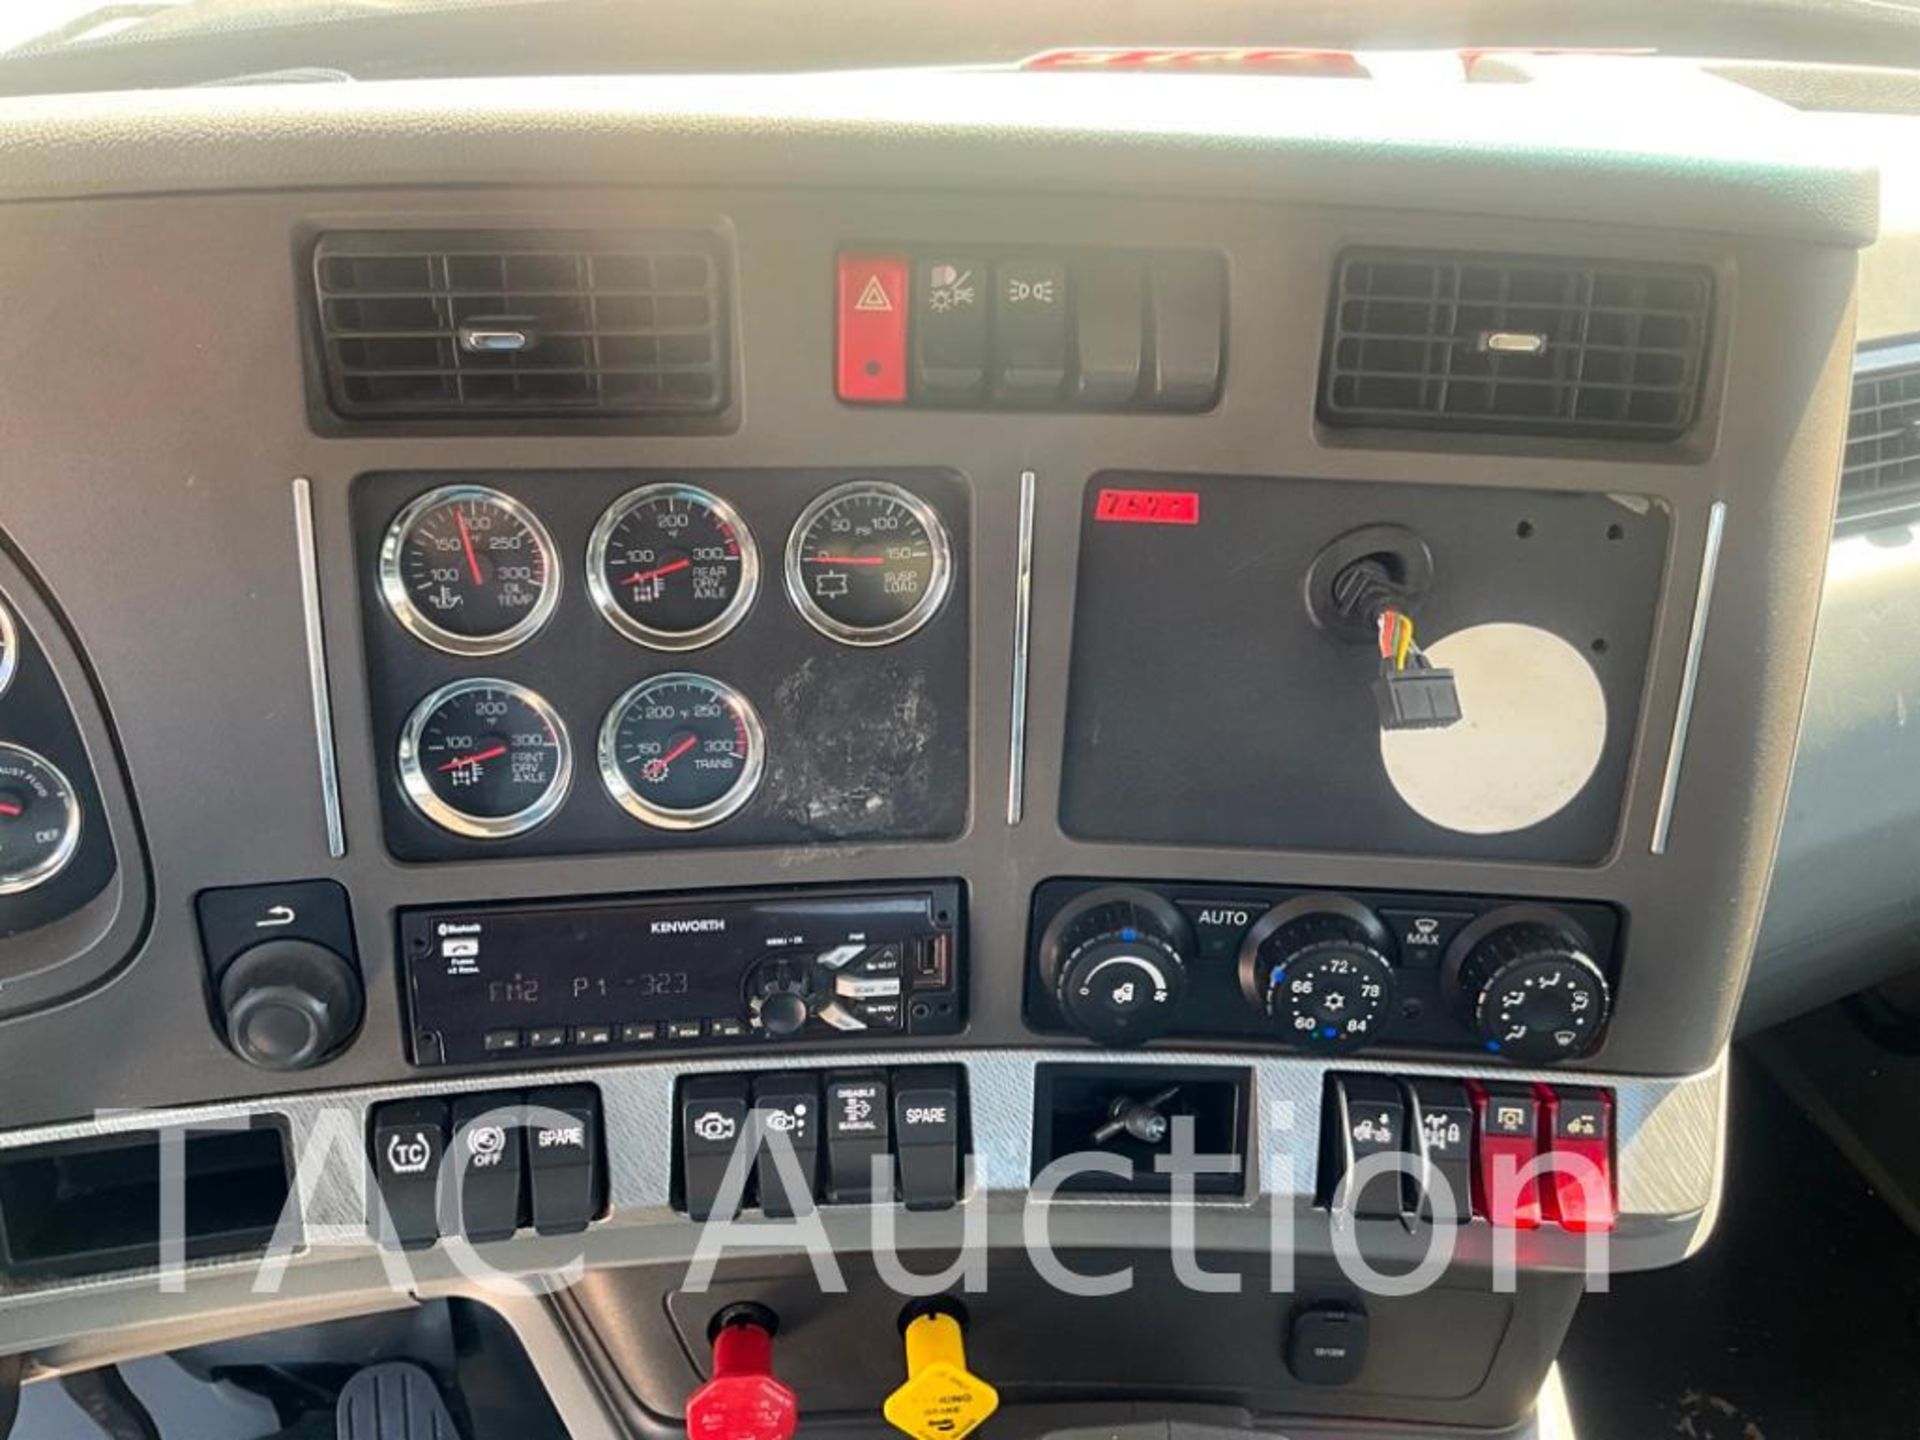 2018 Kenworth T680 Day Cab - Image 19 of 81